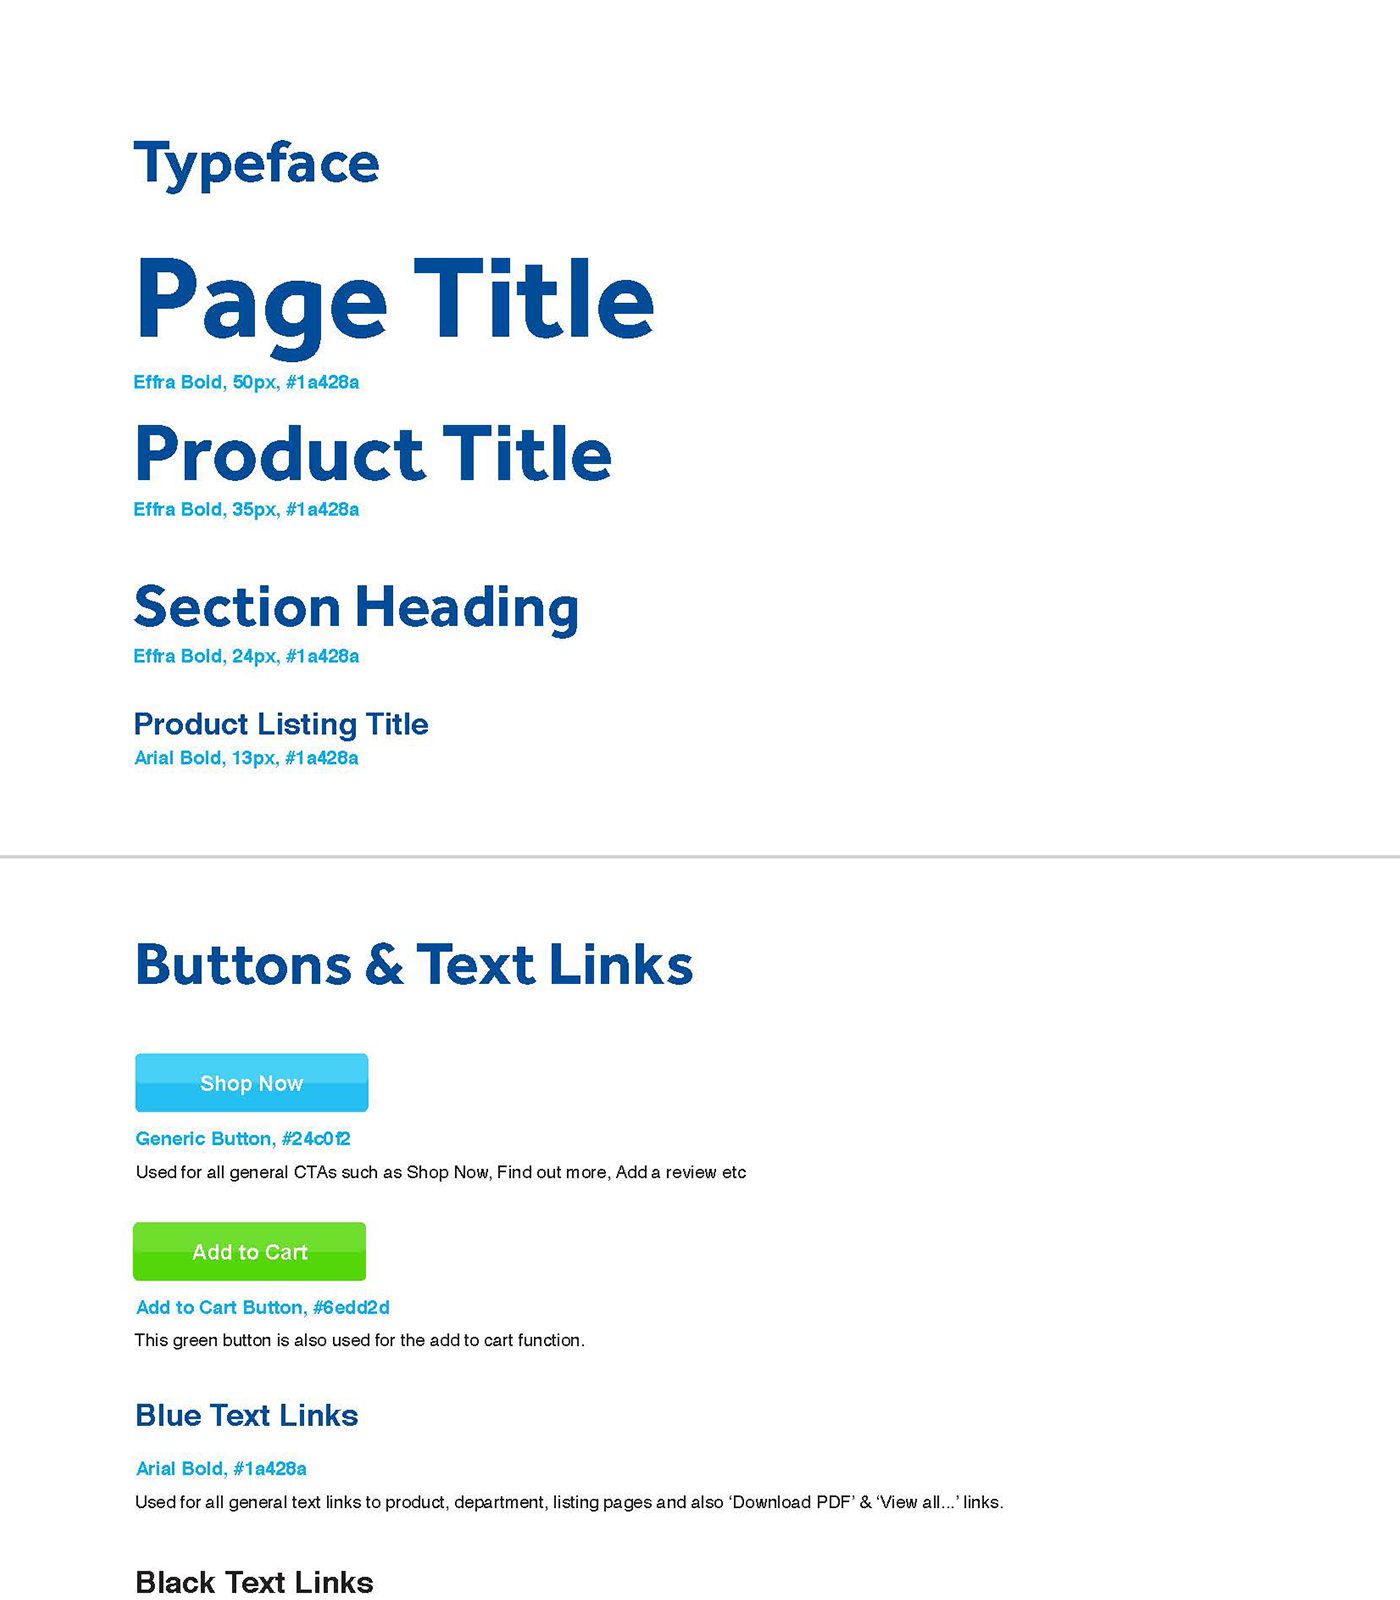 <br />
<b>Notice</b>:  Undefined variable: clientLogo in <b>/home/rysen/public_html/wp-content/themes/rysen/templates/template-relationship.php</b> on line <b>144</b><br />
